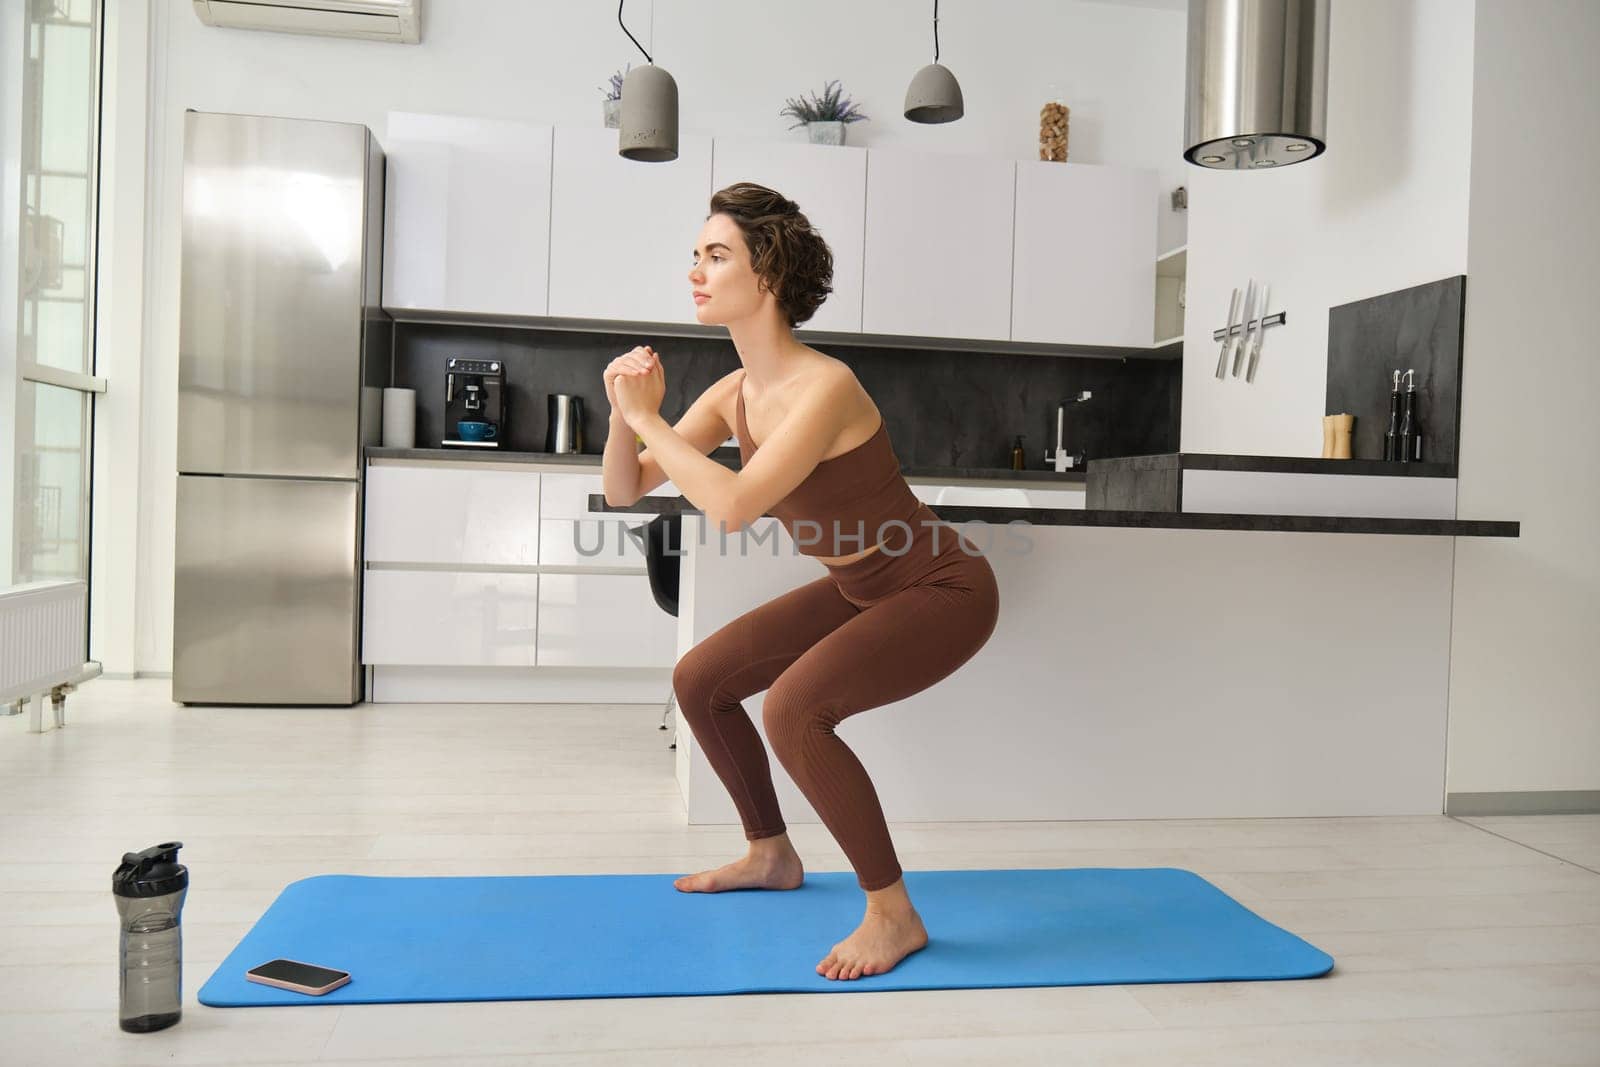 Gym at home. Young woman doing squats in bright room, workout indoors in sportswear, doing exercises on rubber yoga mat by Benzoix